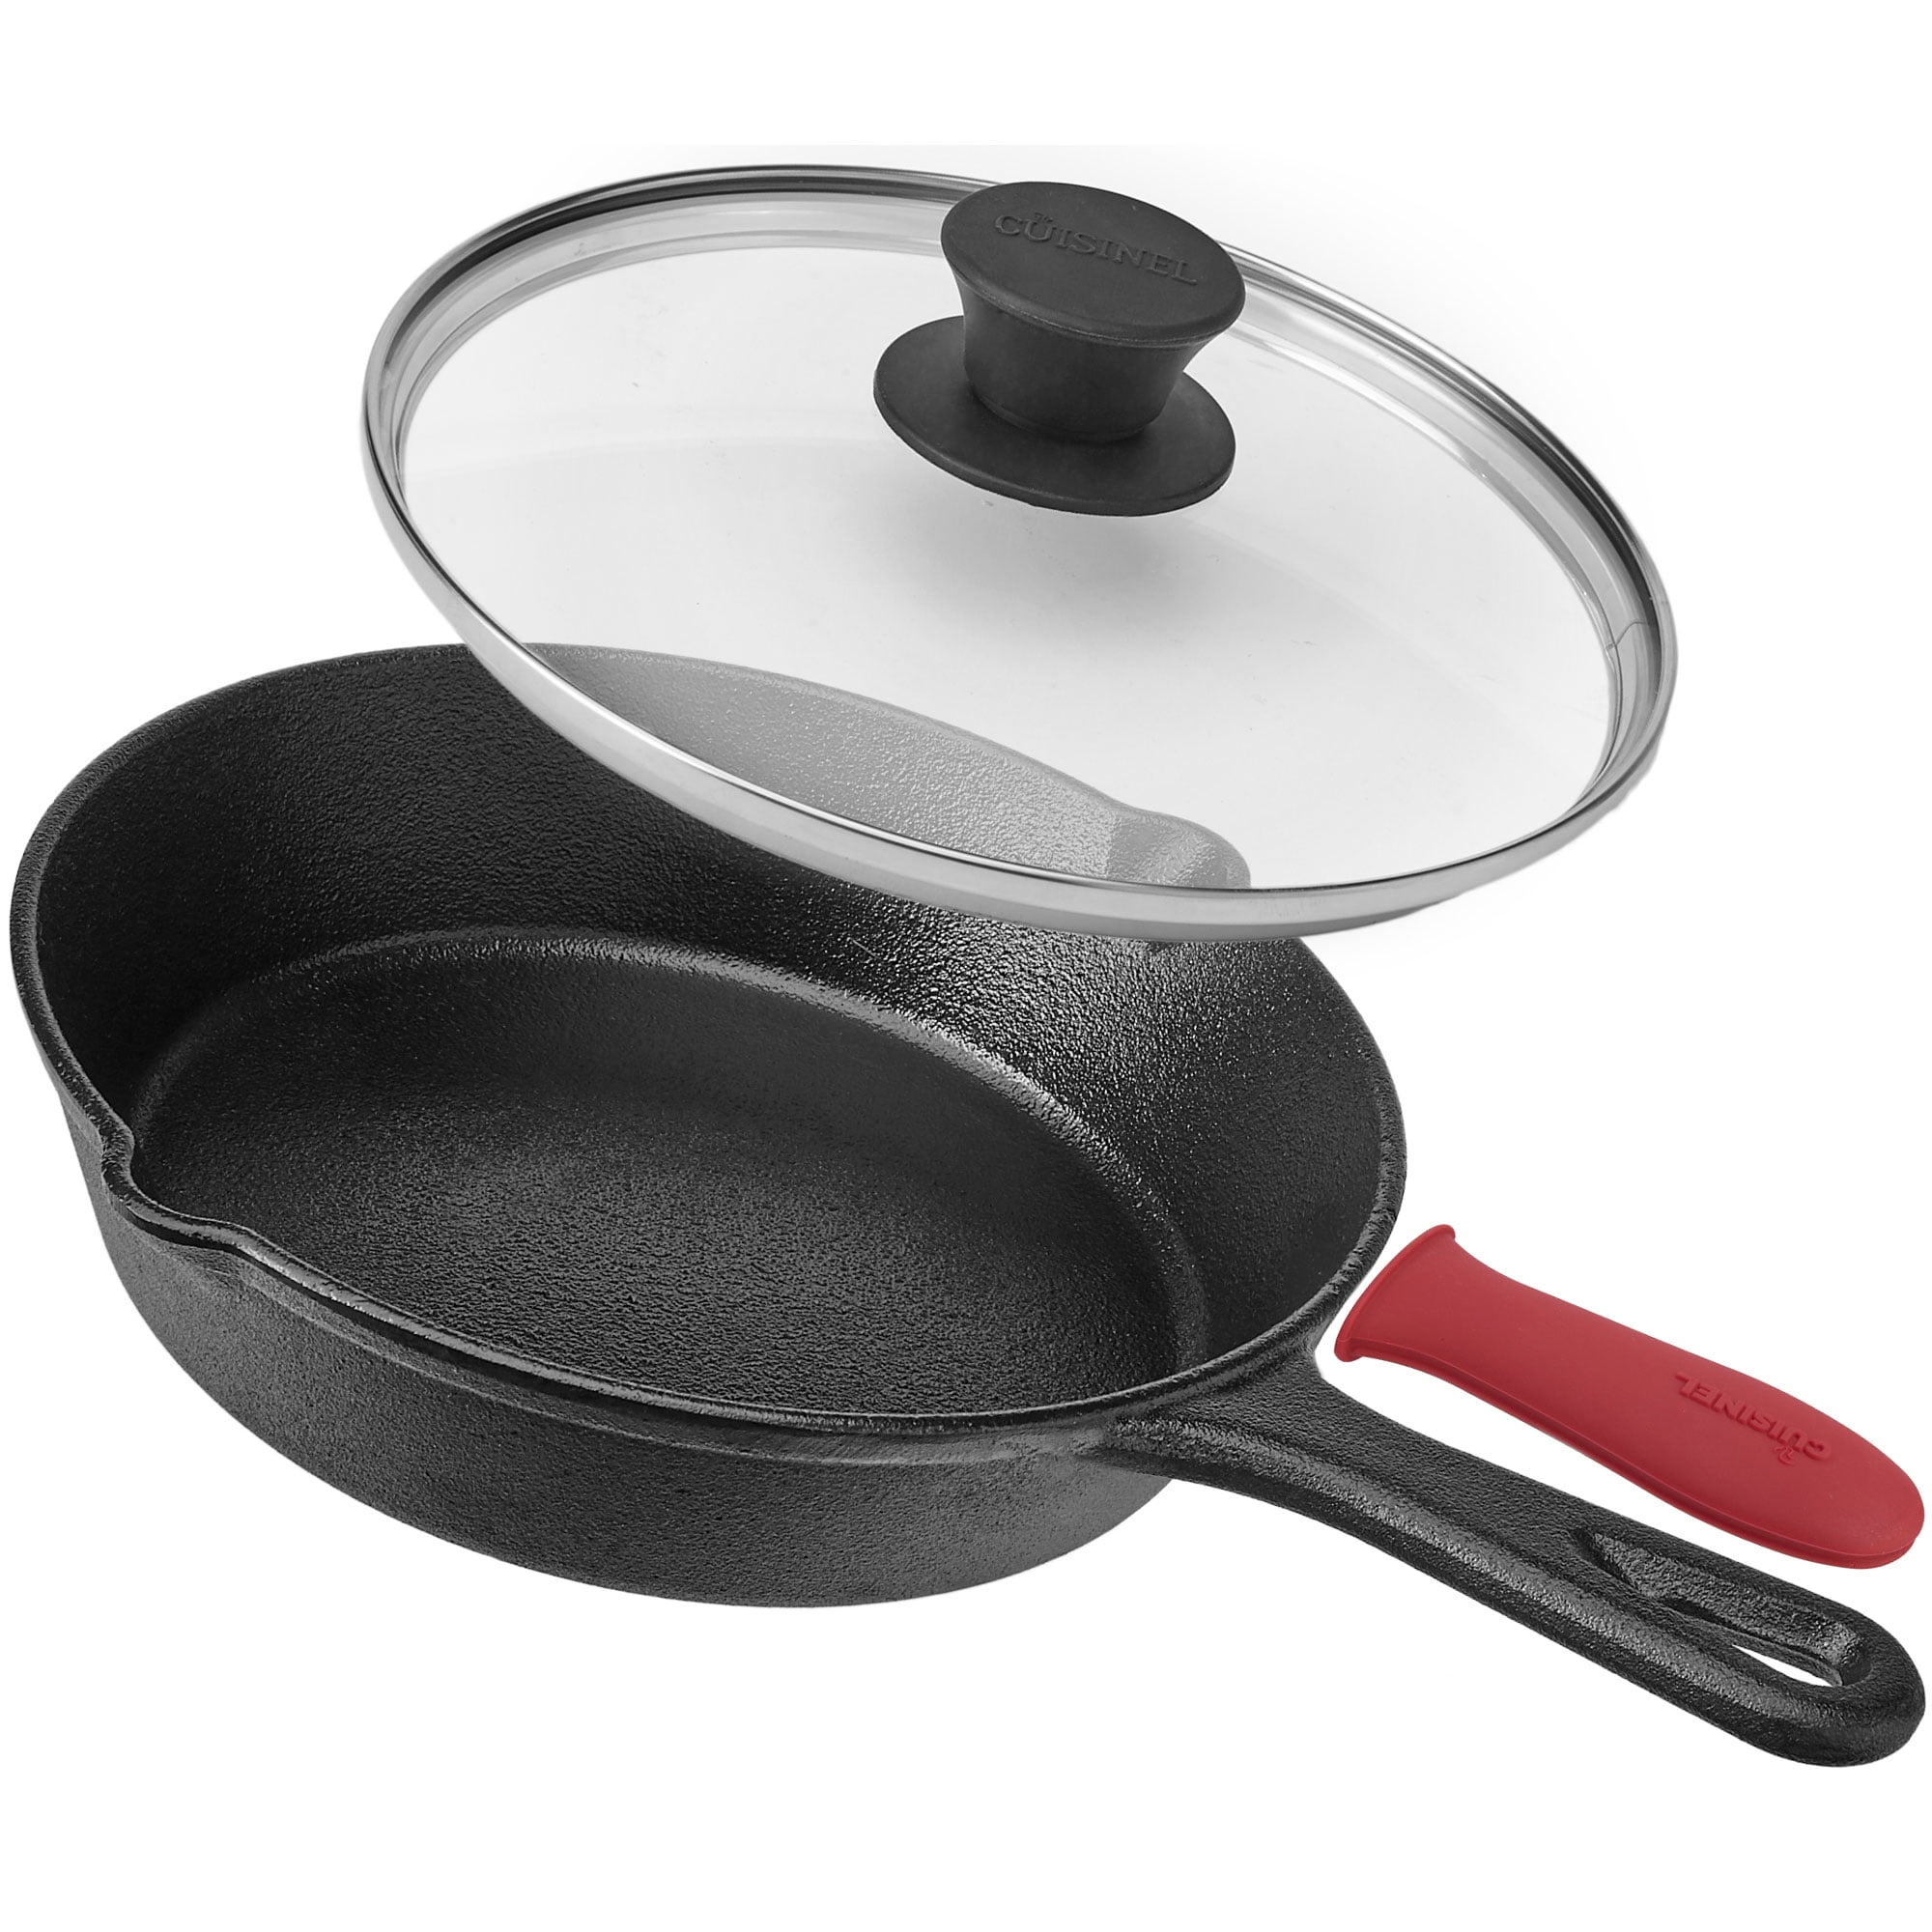  Cuisinel Cast Iron Skillet with Lid - 8-inch Pre-Seasoned  Covered Frying Pan Set + Silicone Handle and Lid Holders + Scraper/Cleaner  - Indoor/Outdoor, Oven, Camping Fire, Grill Safe Kitchen Cookware: Home